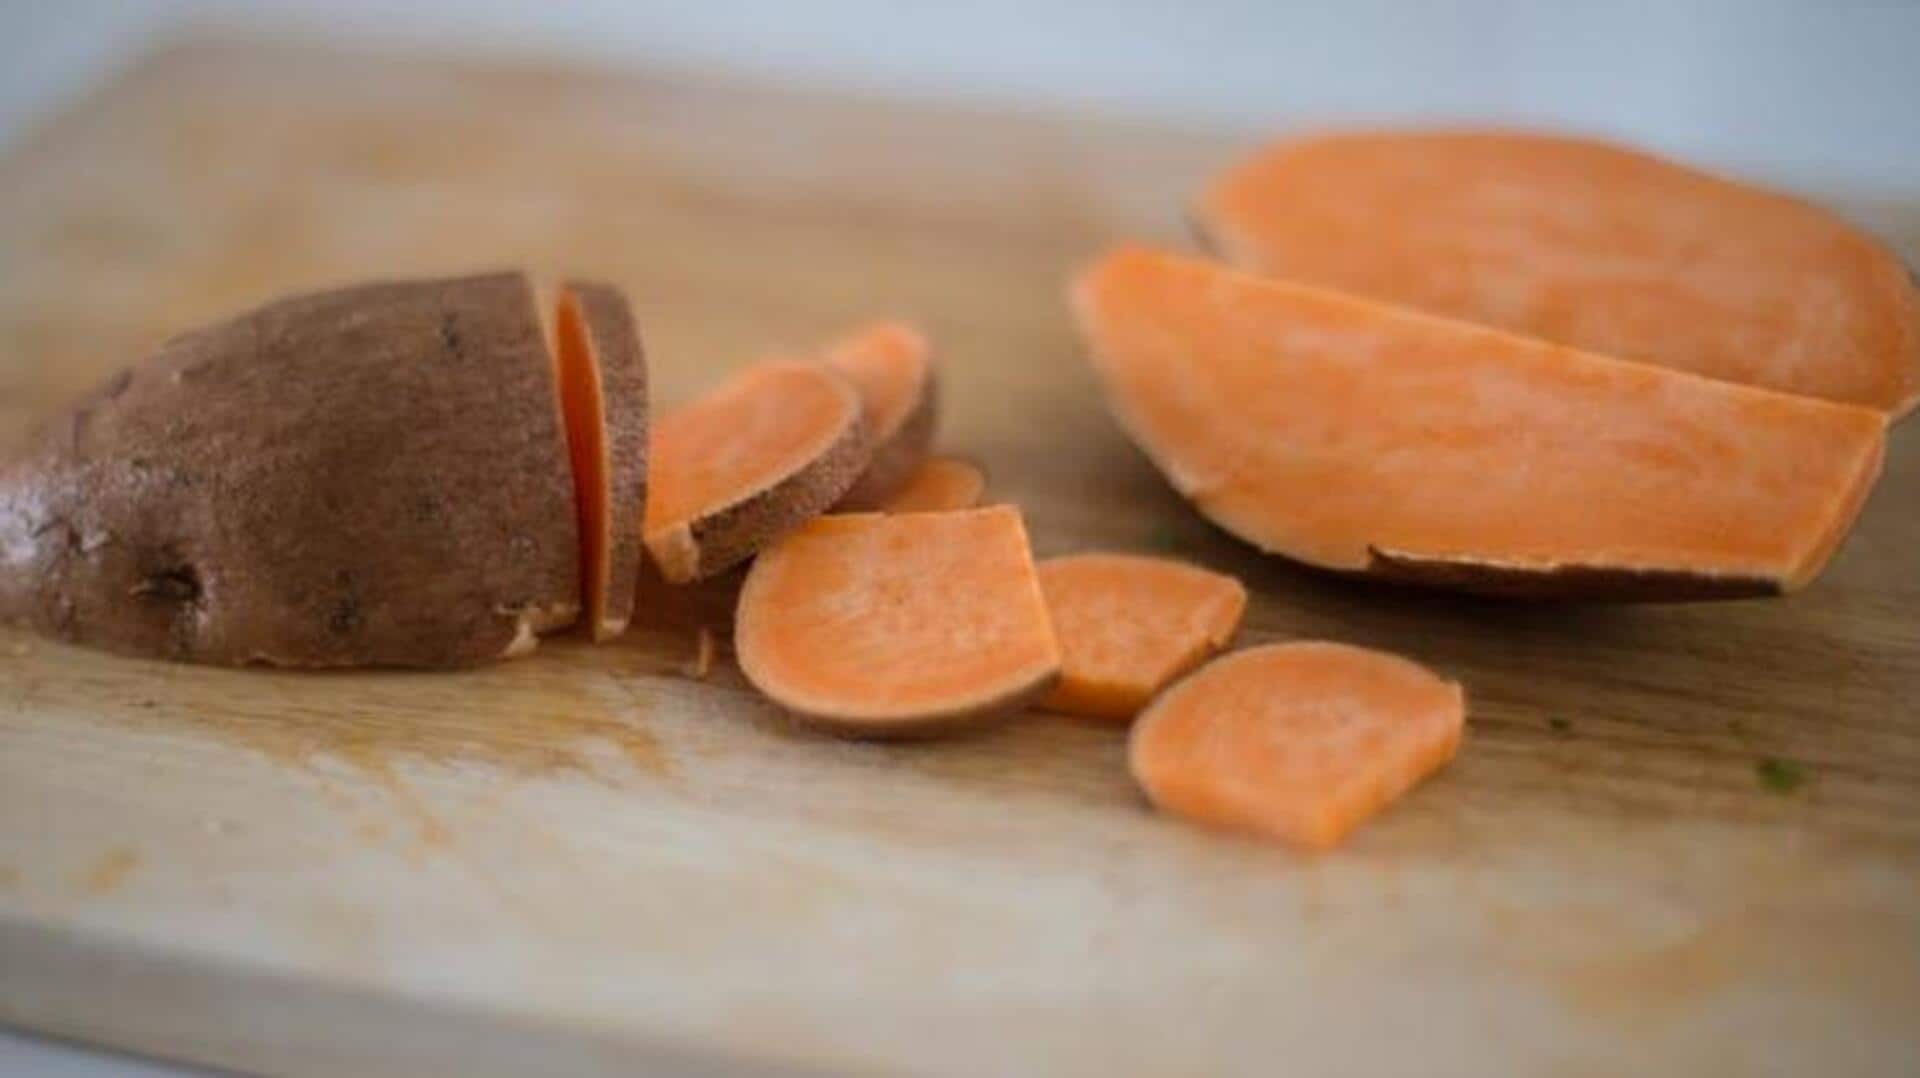 Here's how sweet potatoes are beneficial for healthy skin